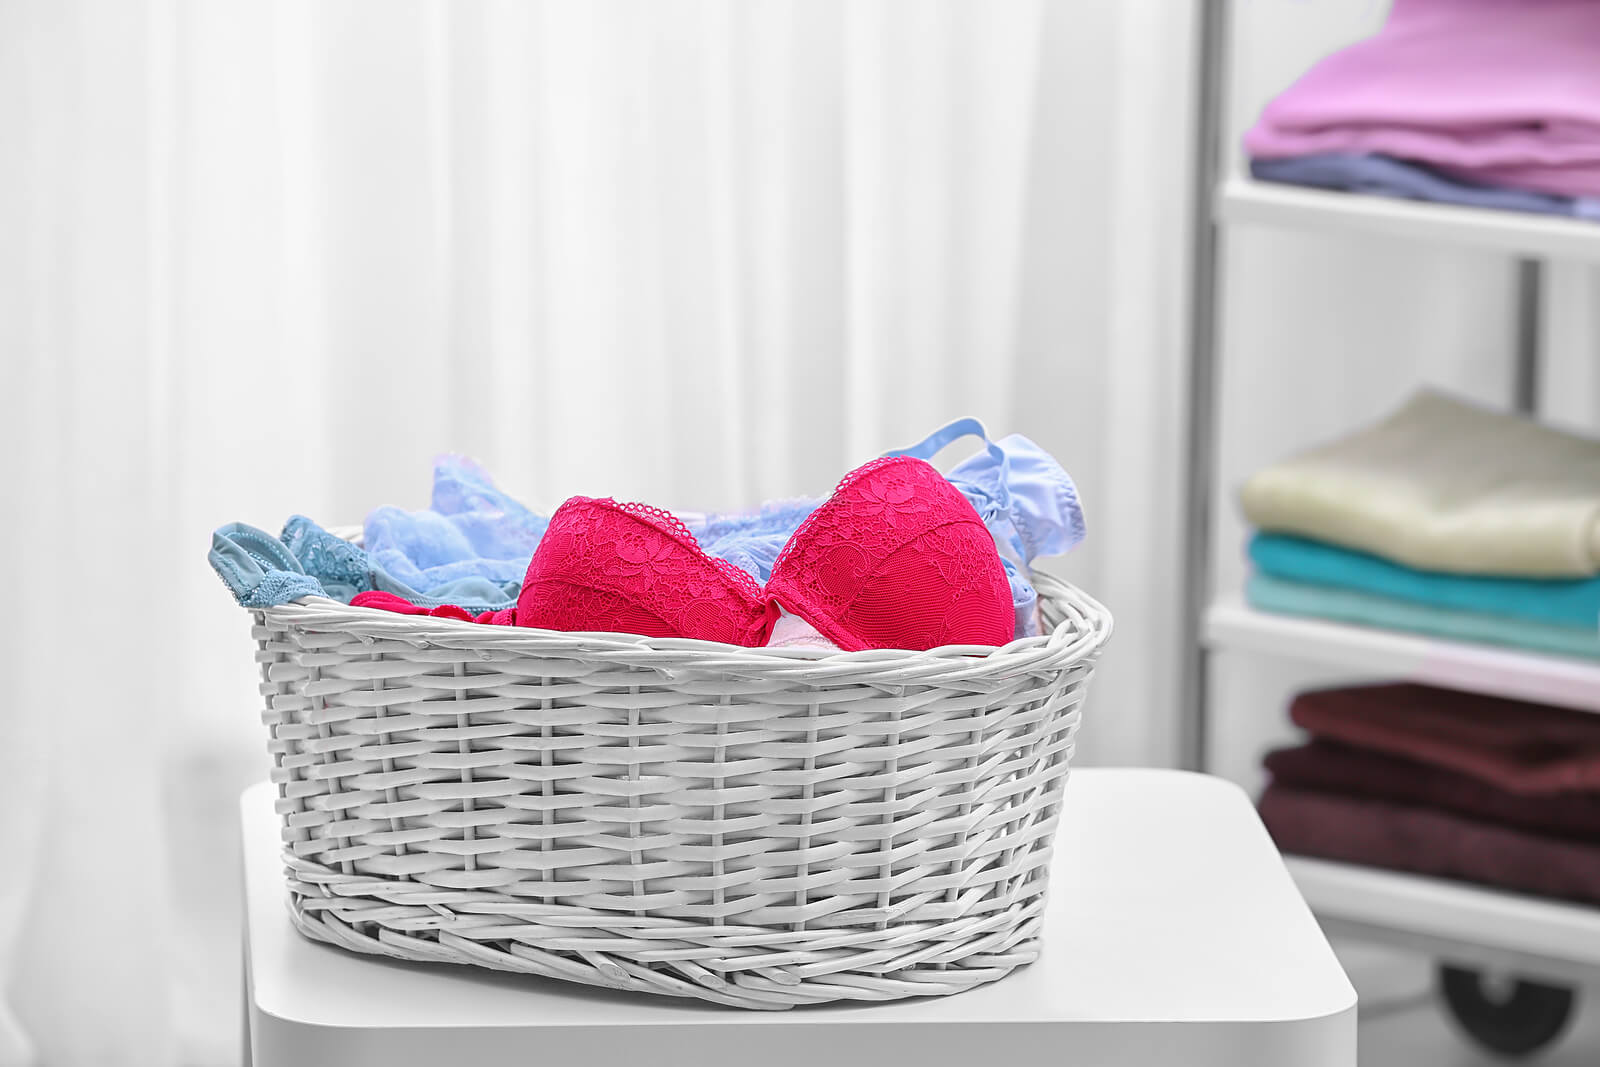 How to wash a bra without mistreating it?